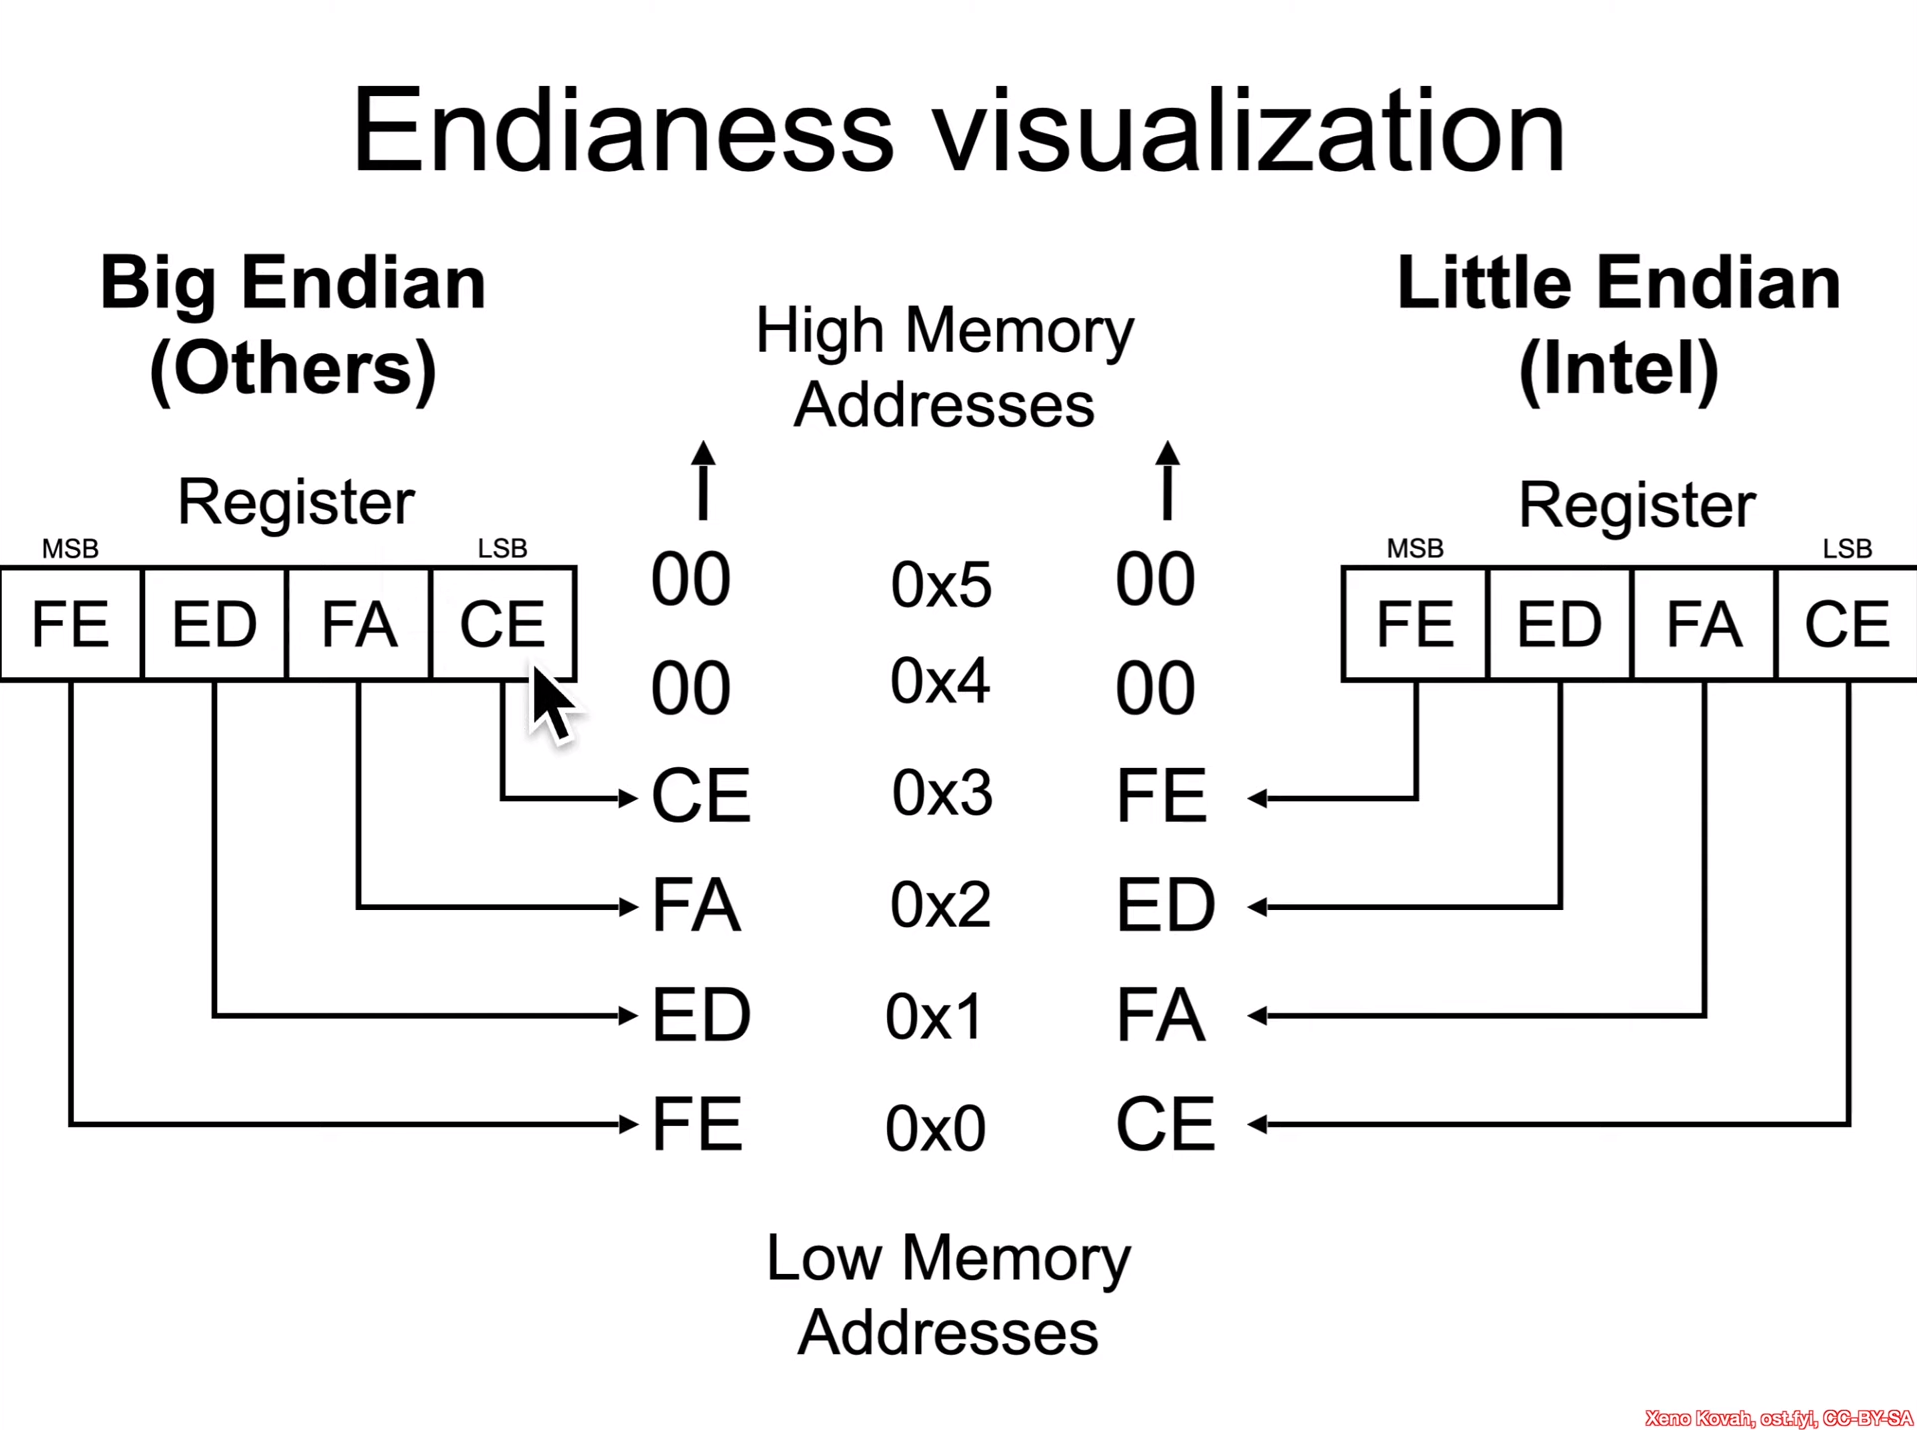 Endianness